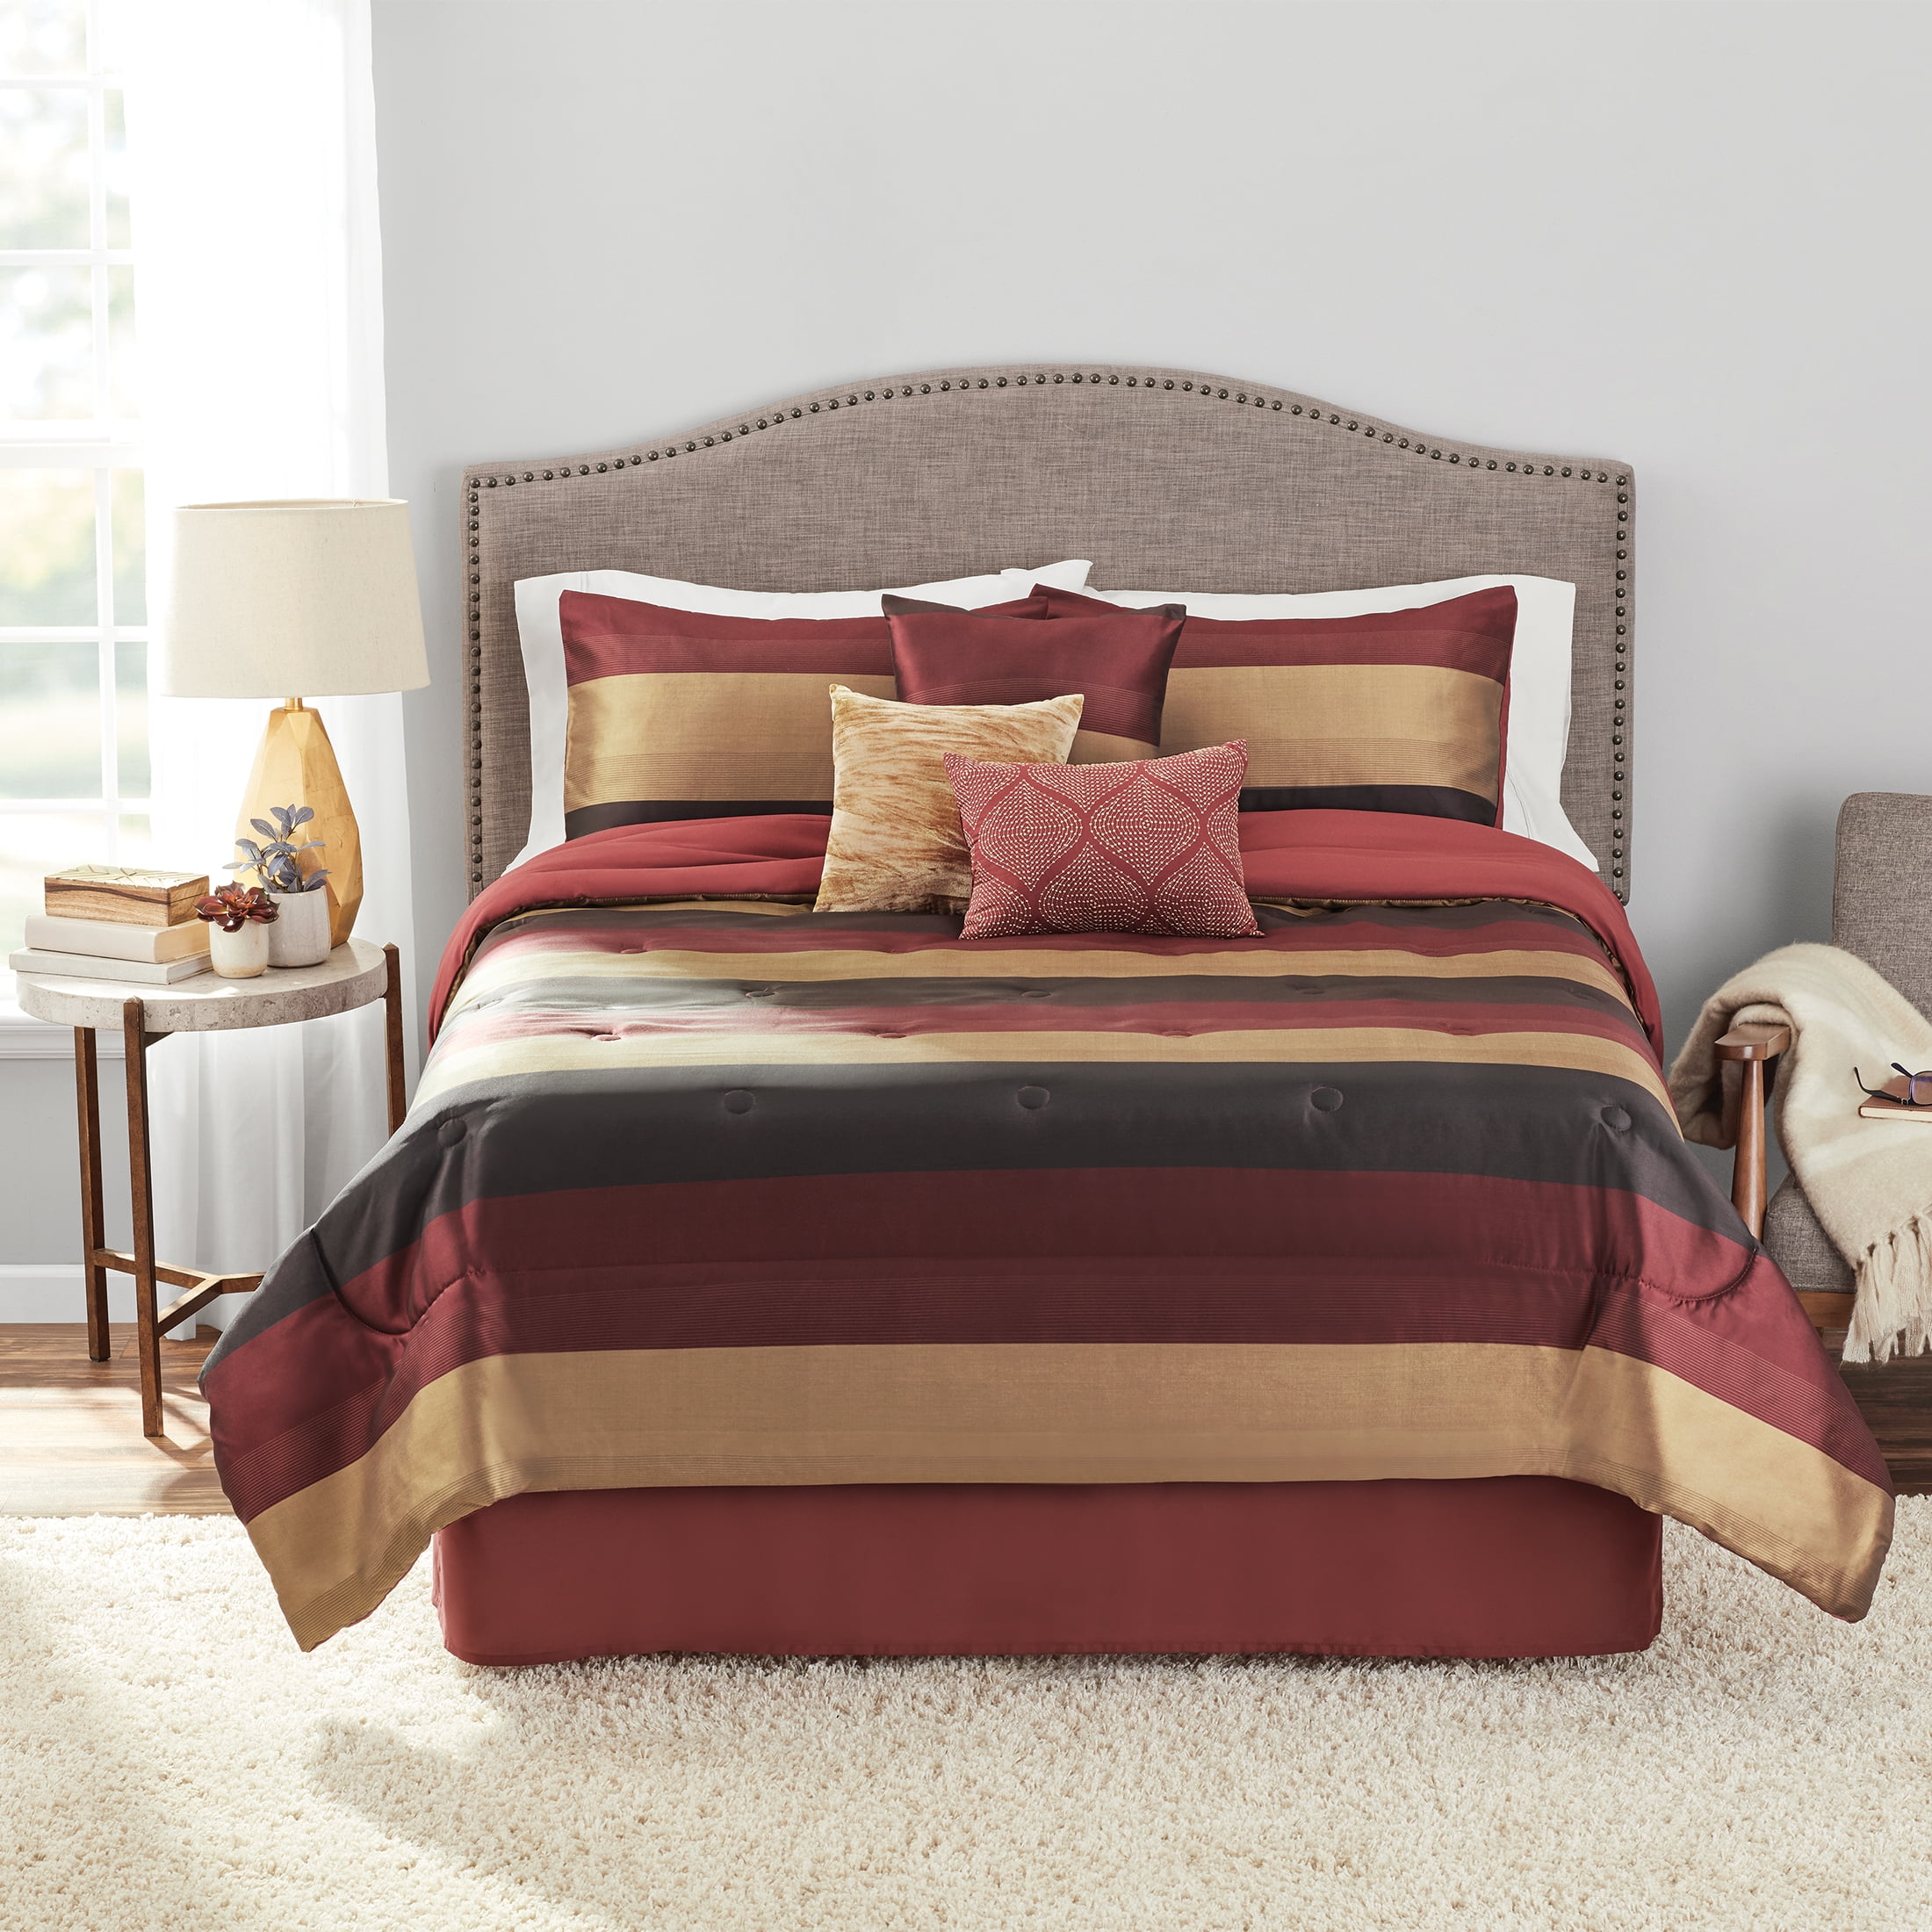 Luxury 7 Piece Quilted Jacquard Bedspread & Comforter Sets With Cushion Pillows 